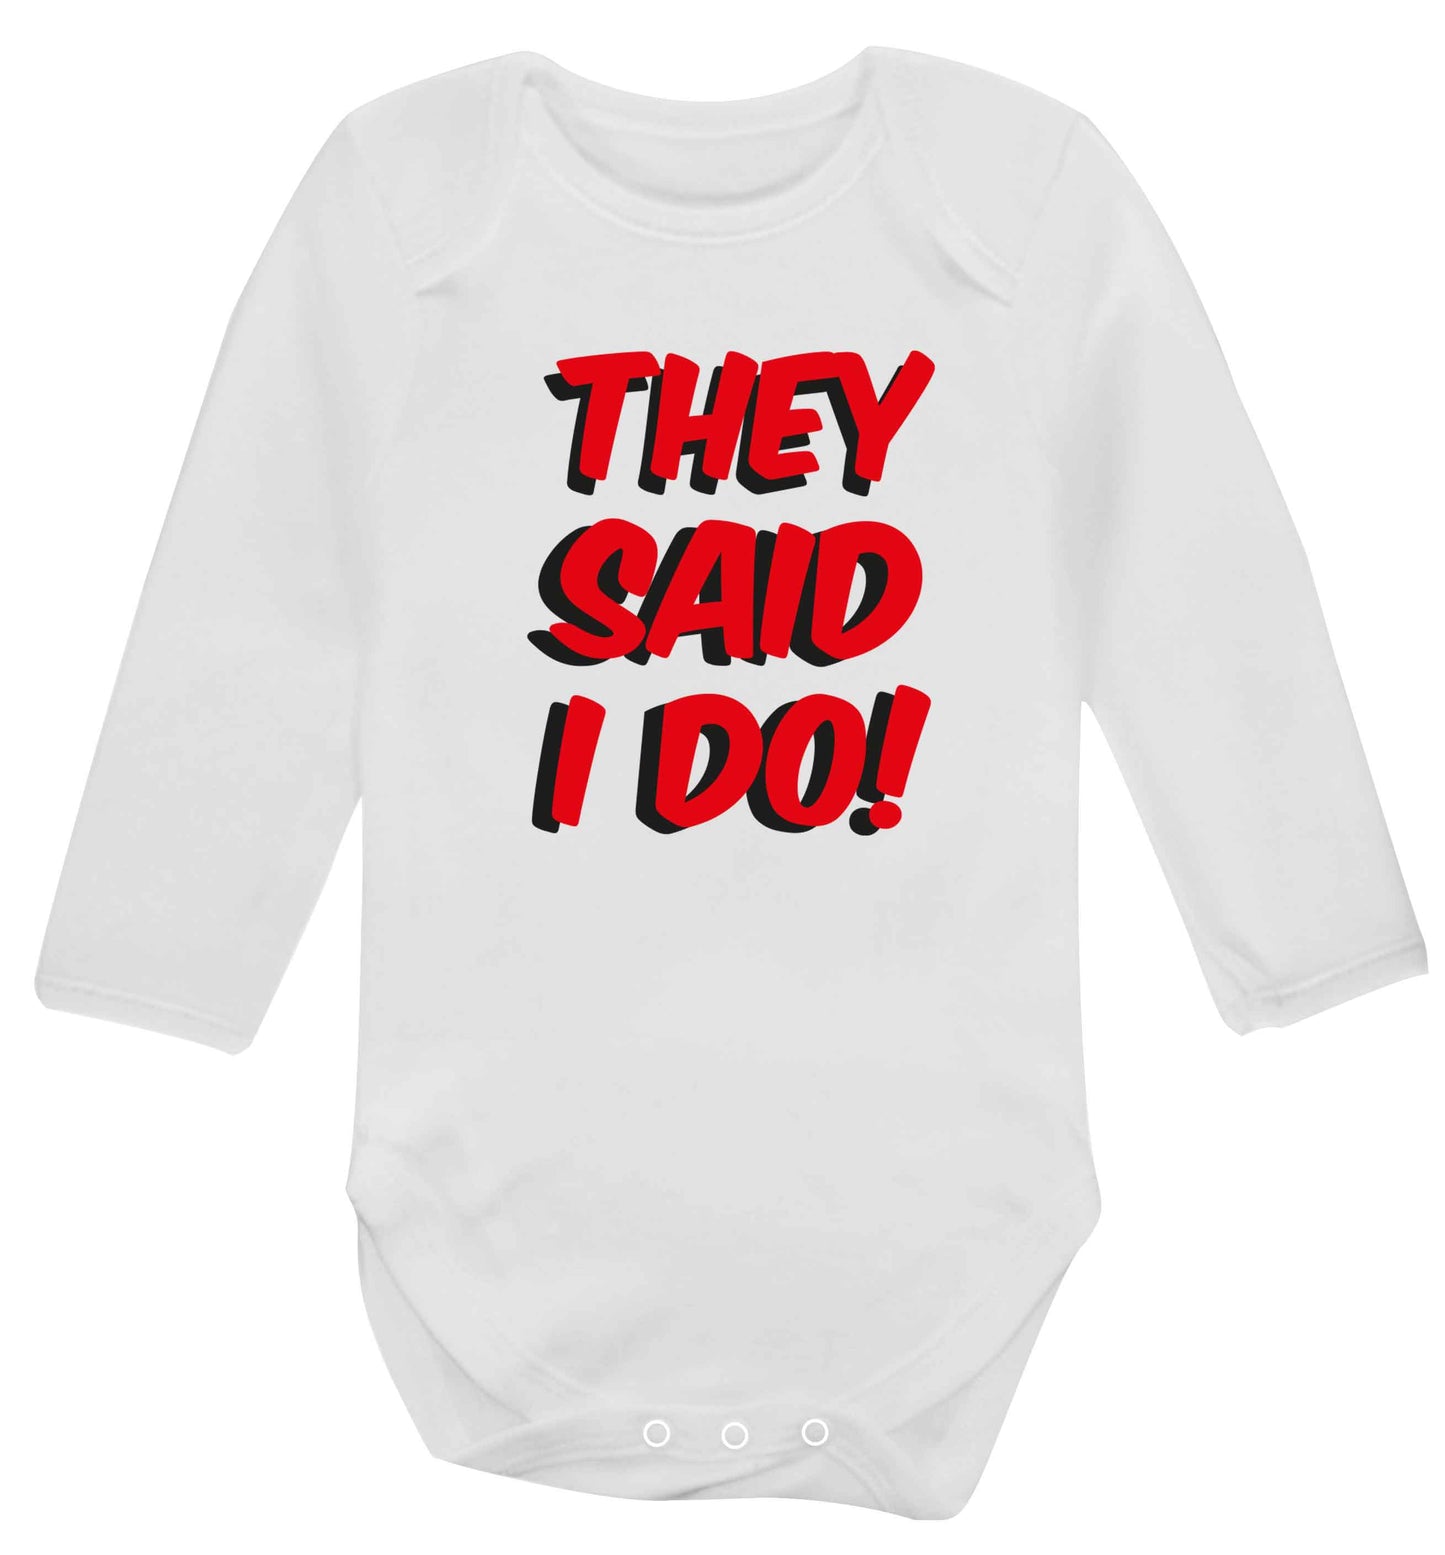 They said I do baby vest long sleeved white 6-12 months